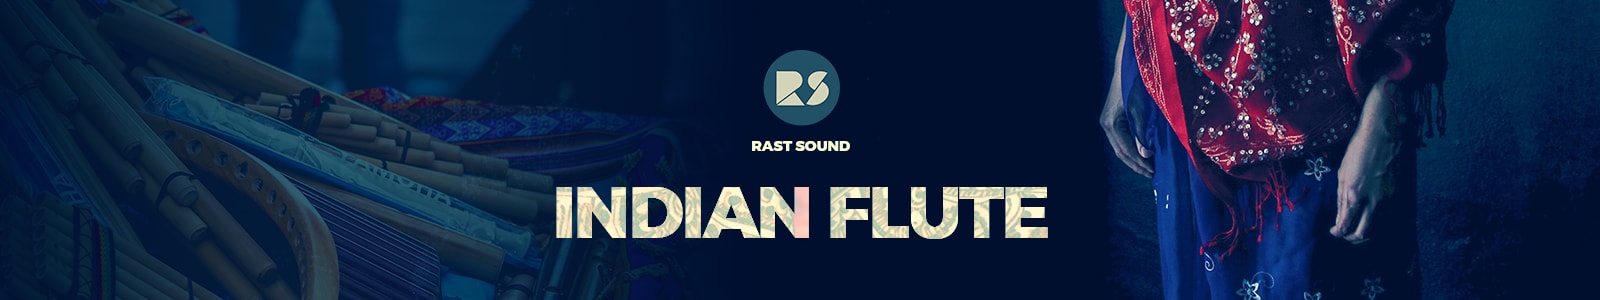 Indian Flute by Rast Sound